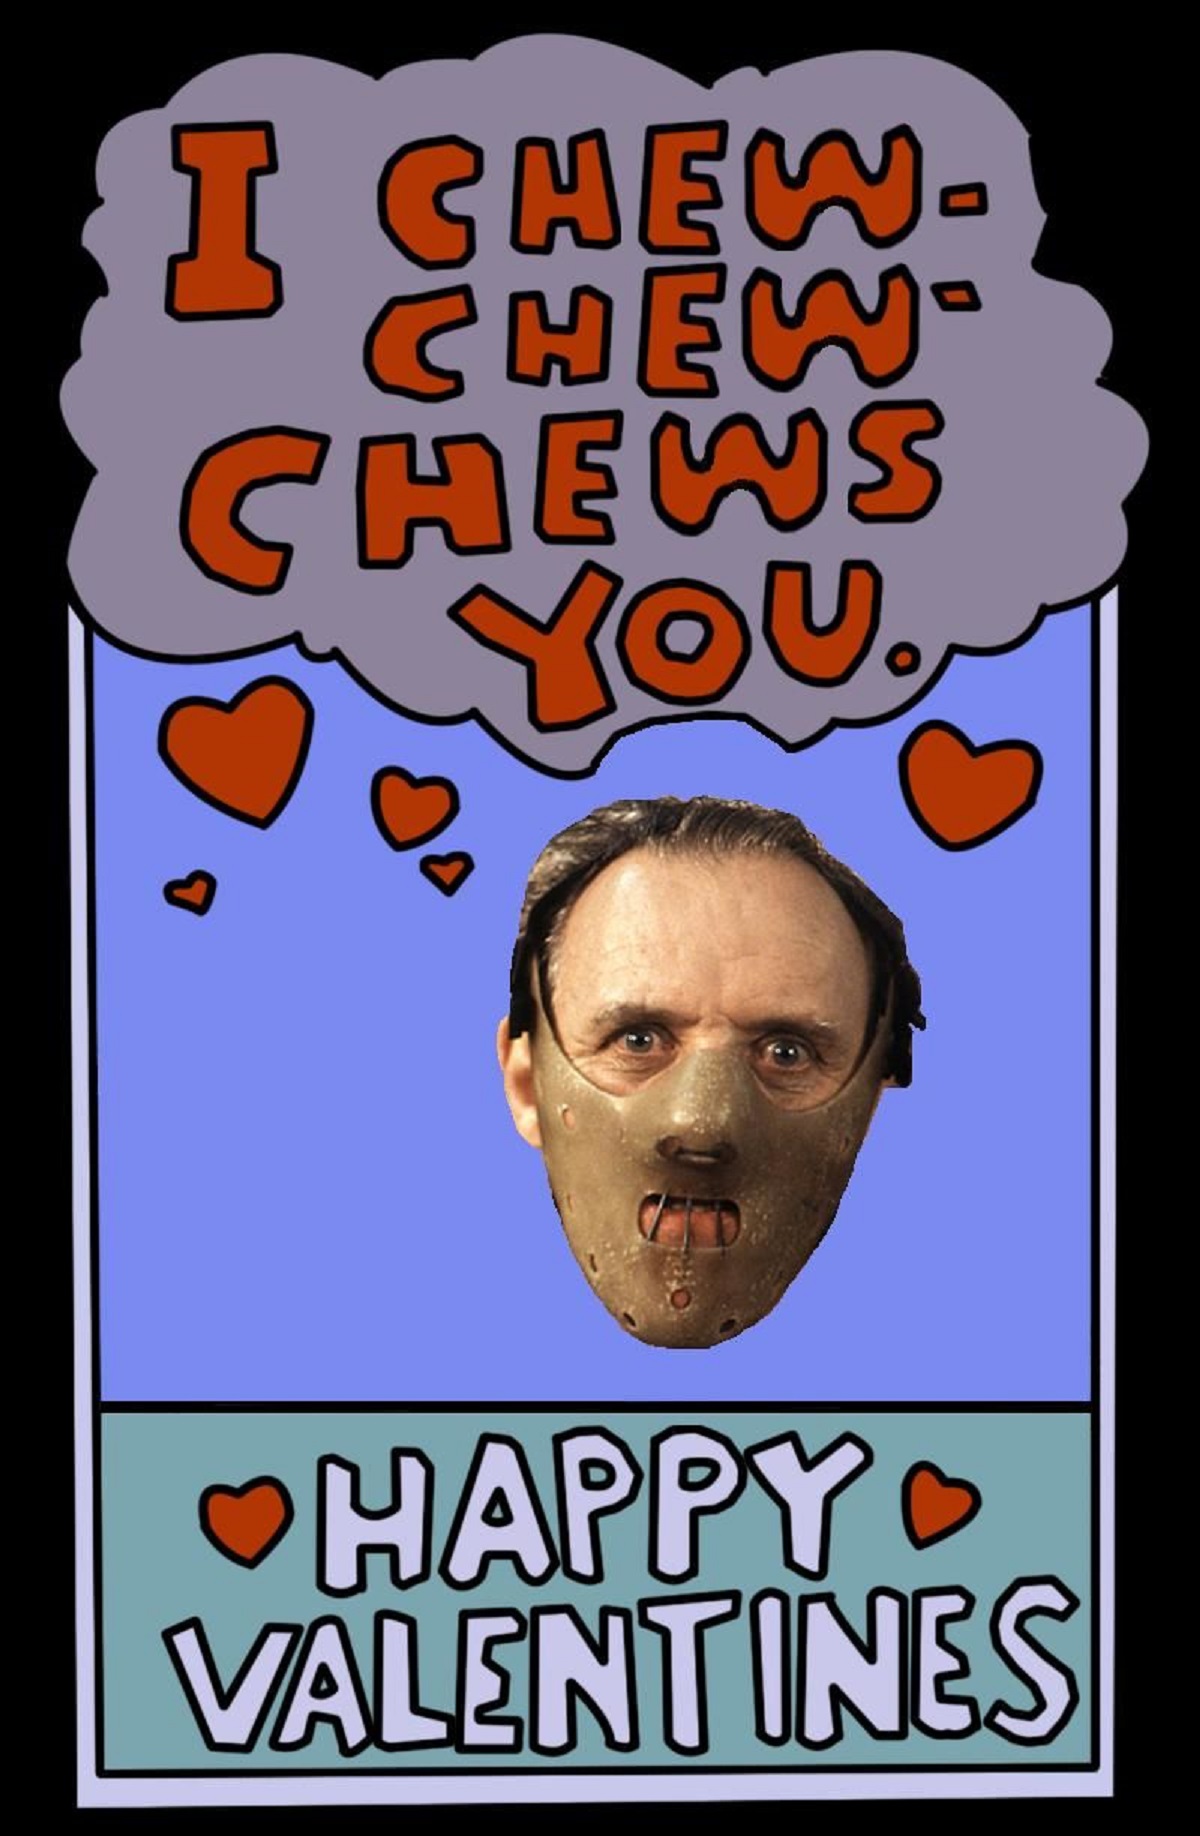 38 Valentine Memes and E-Cards